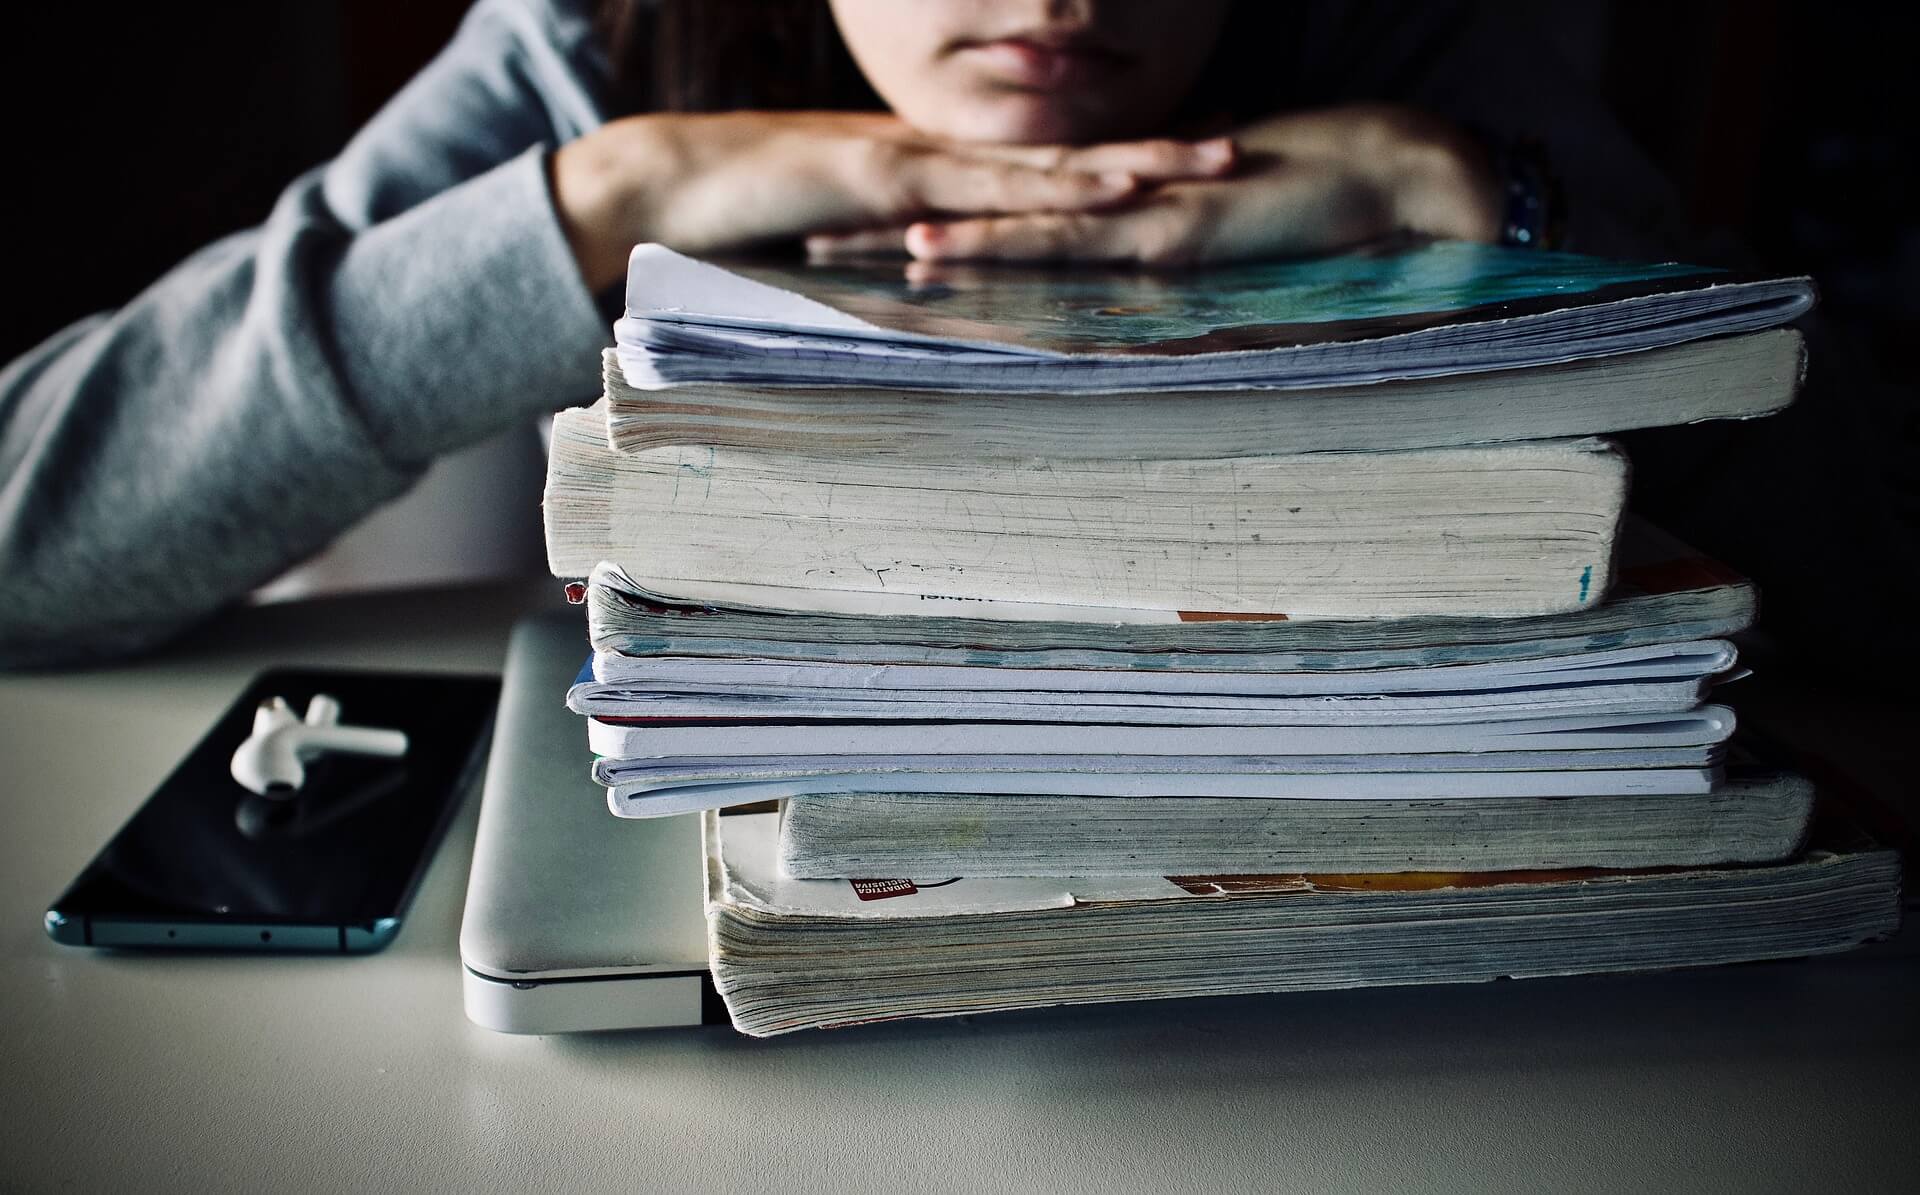 A student resting their head on a stack of textbooks